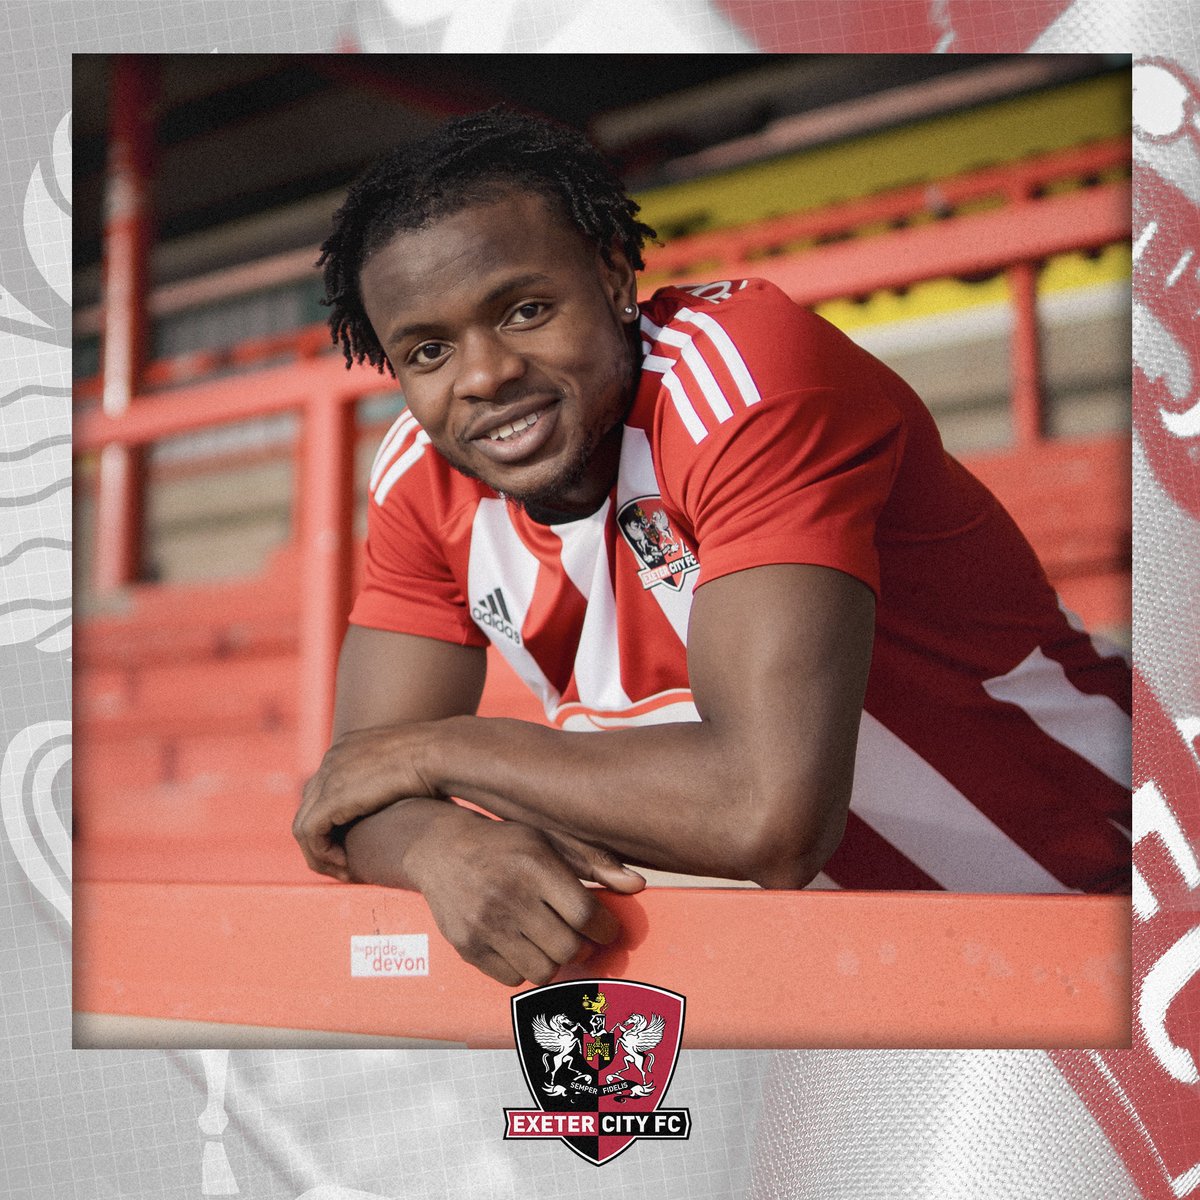 OfficialECFC tweet picture